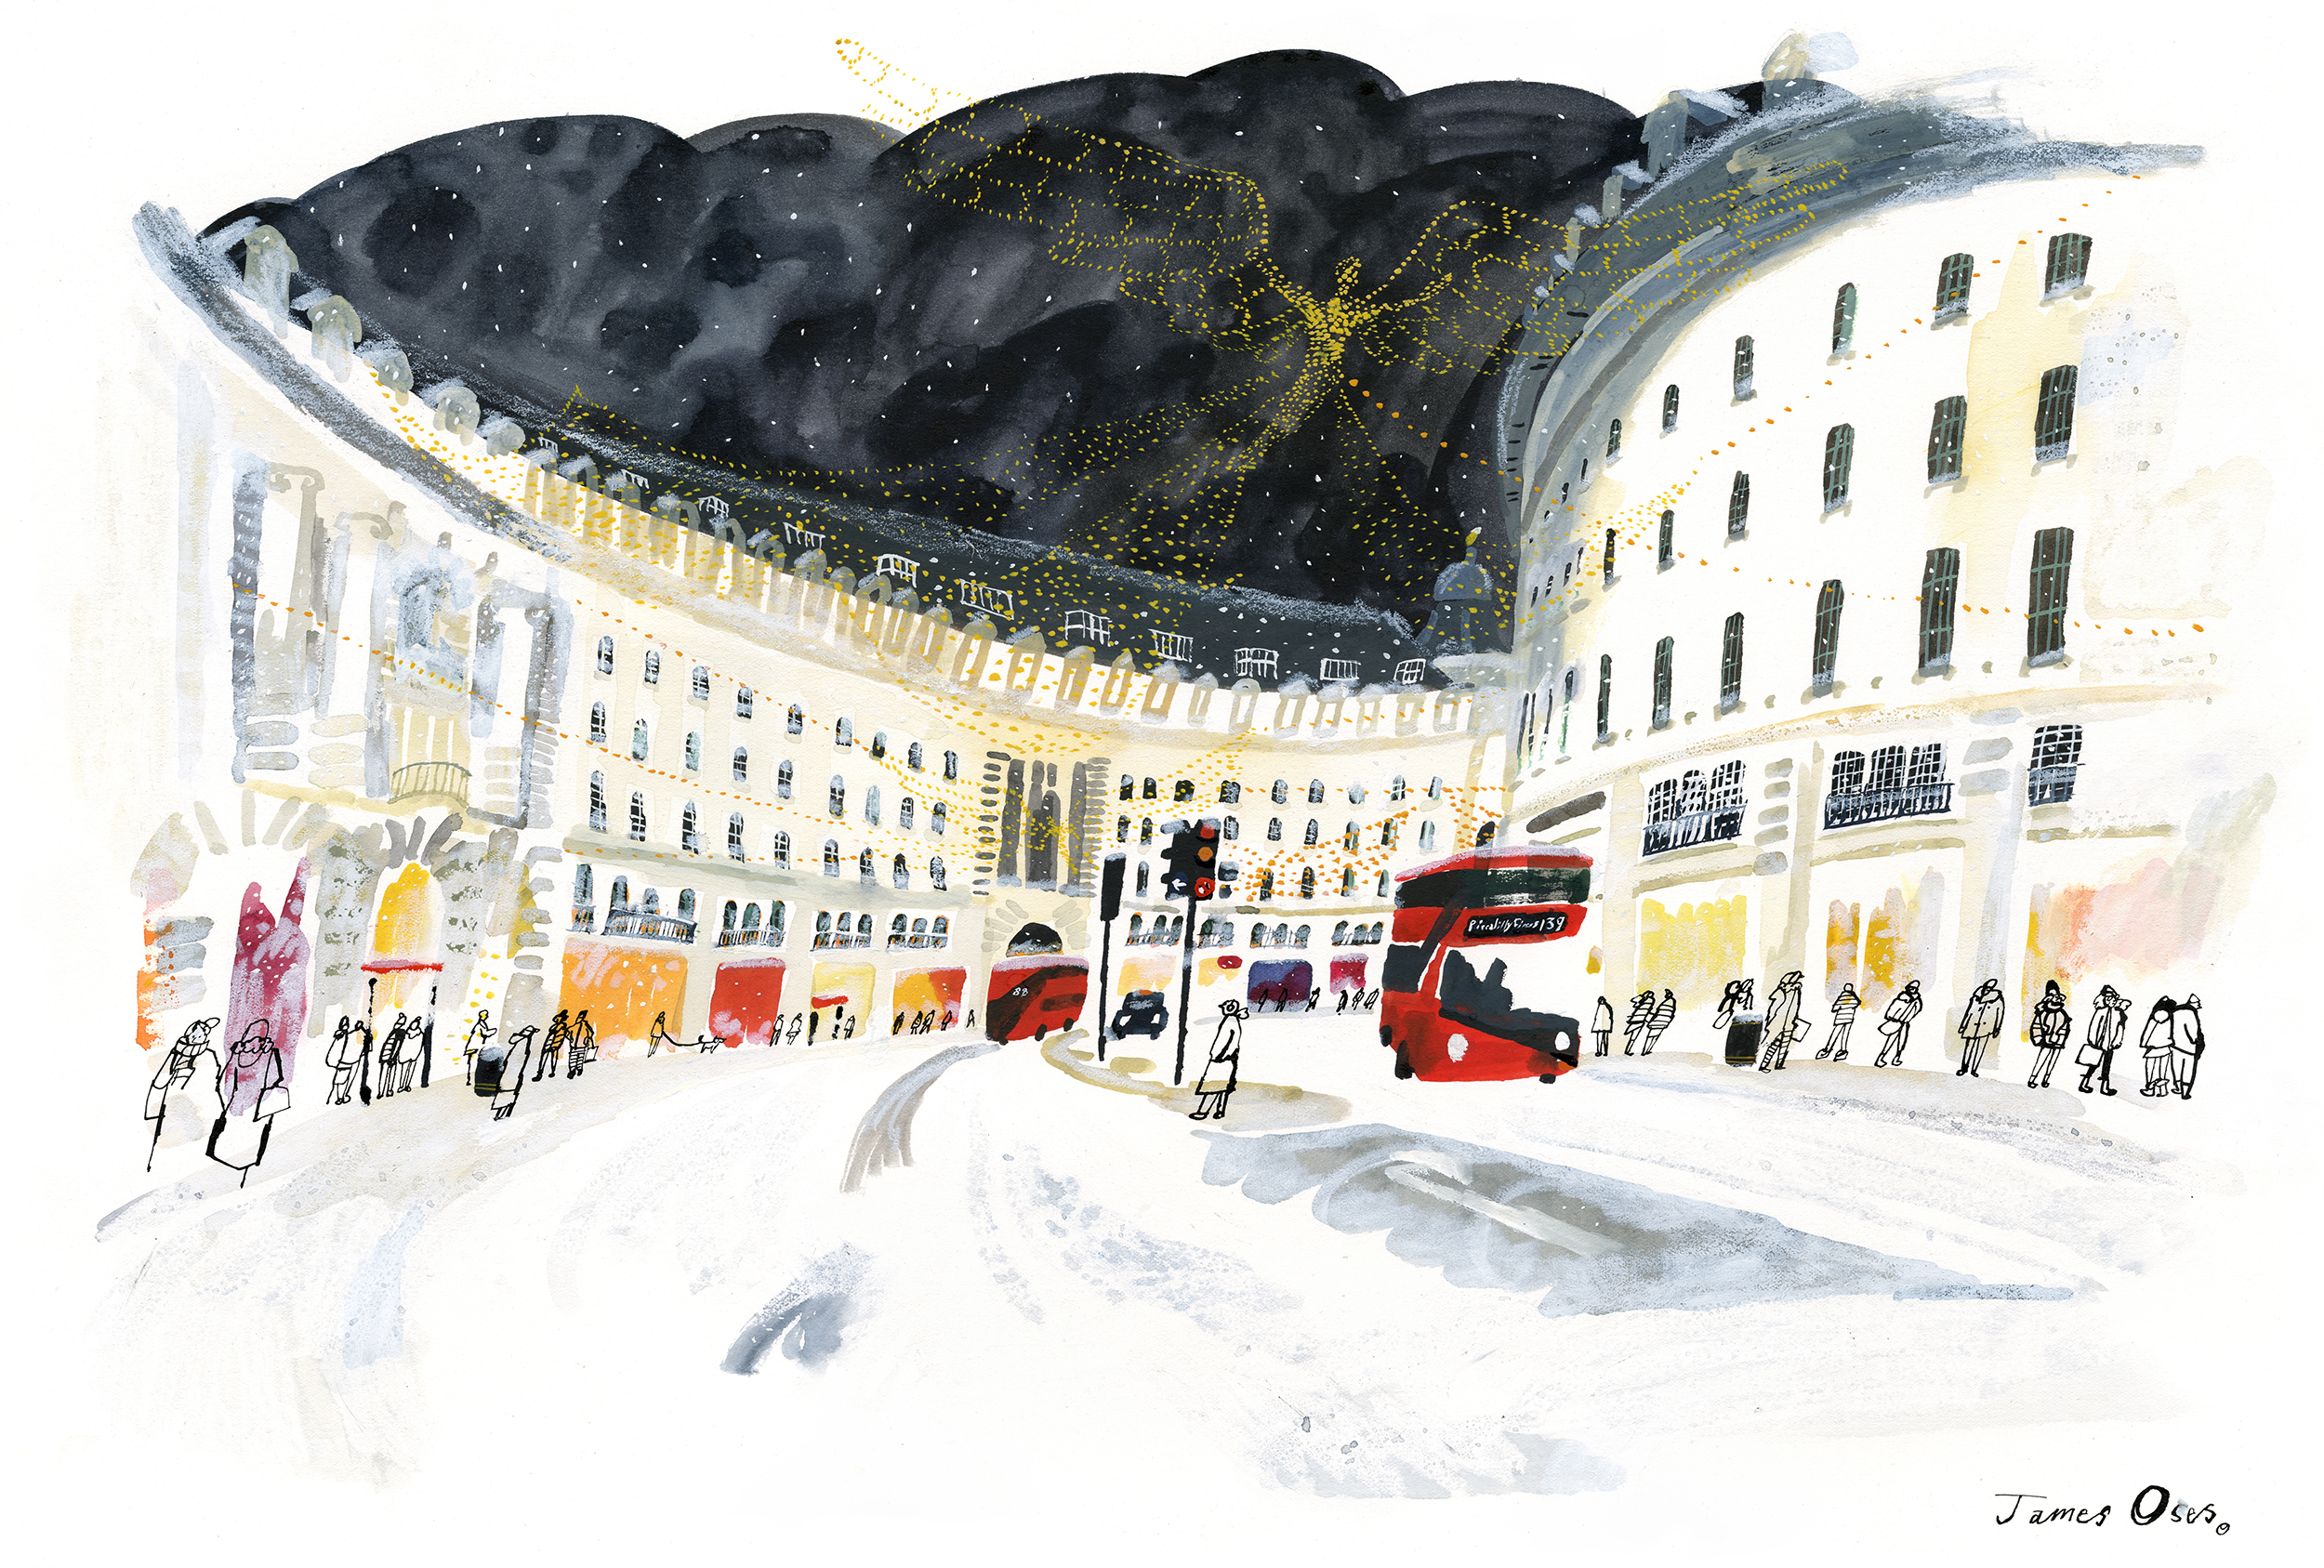 Regent Street by James Oses